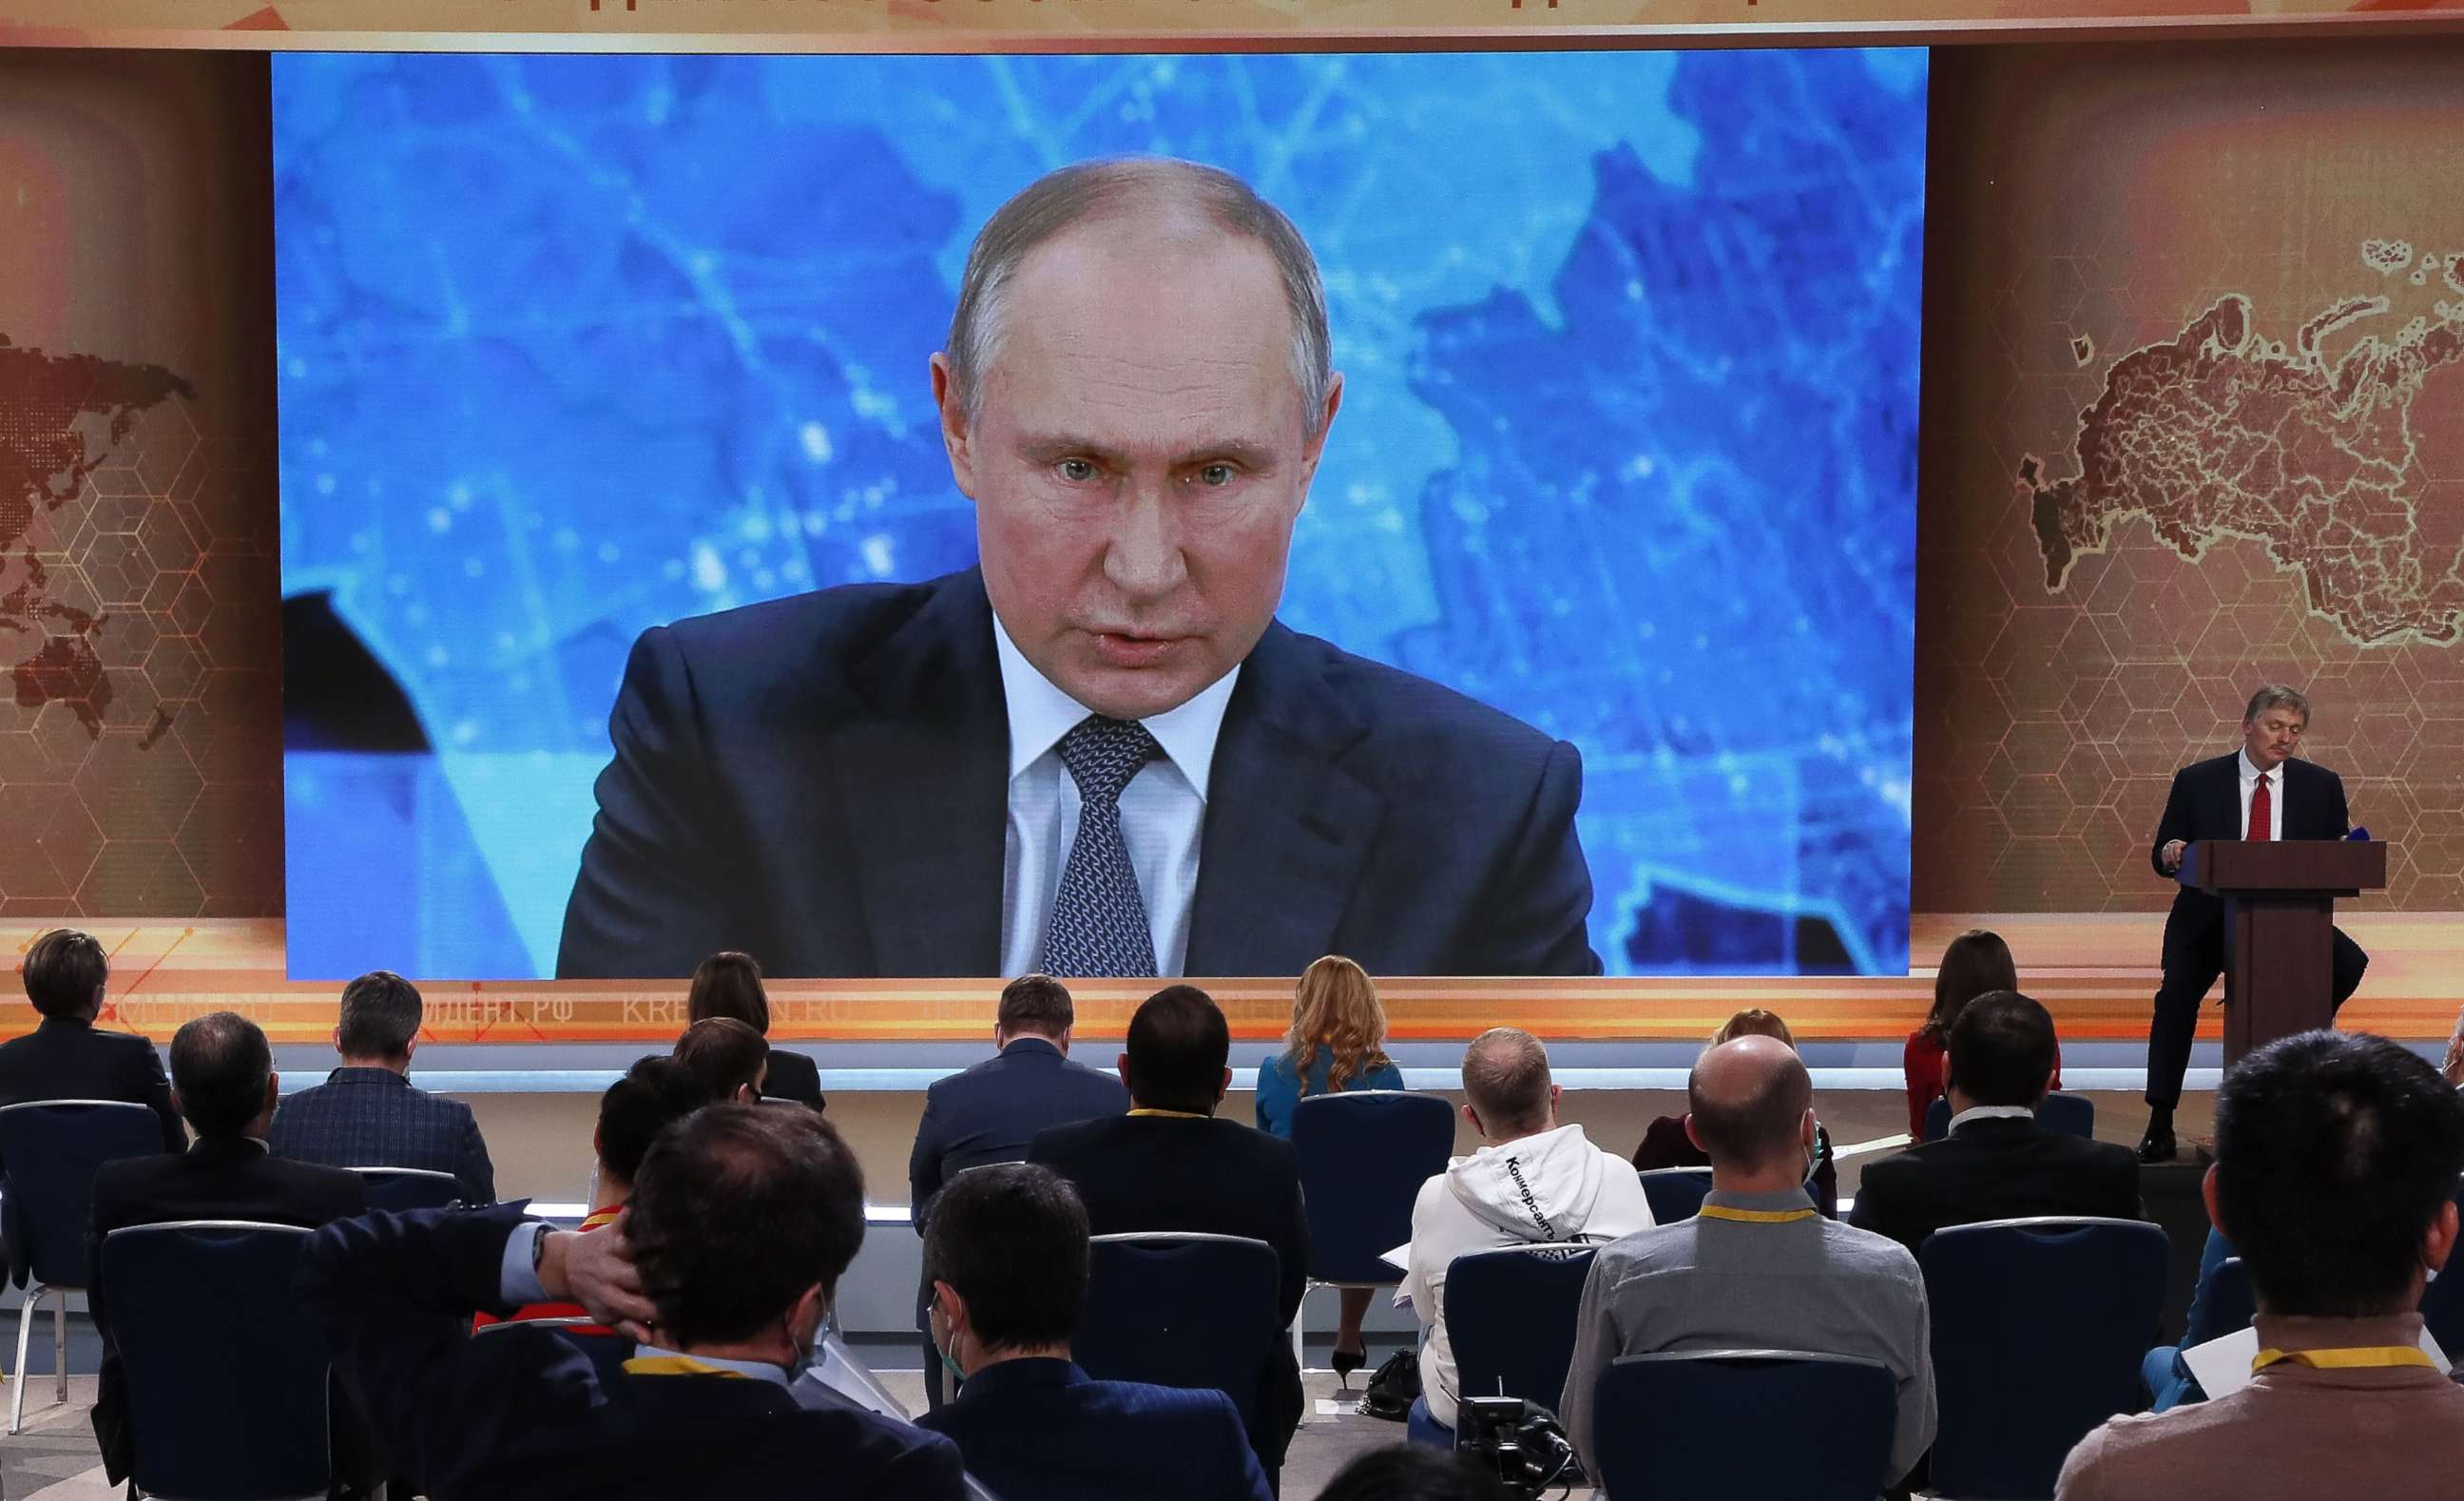 PHOTO: Journalists look at a screen showing Russian President Vladimir Putin speaking during his annual press conference via a video link from the Novo-Ogaryovo state residence, at the World Trade Center in Moscow, Dec. 17, 2020.